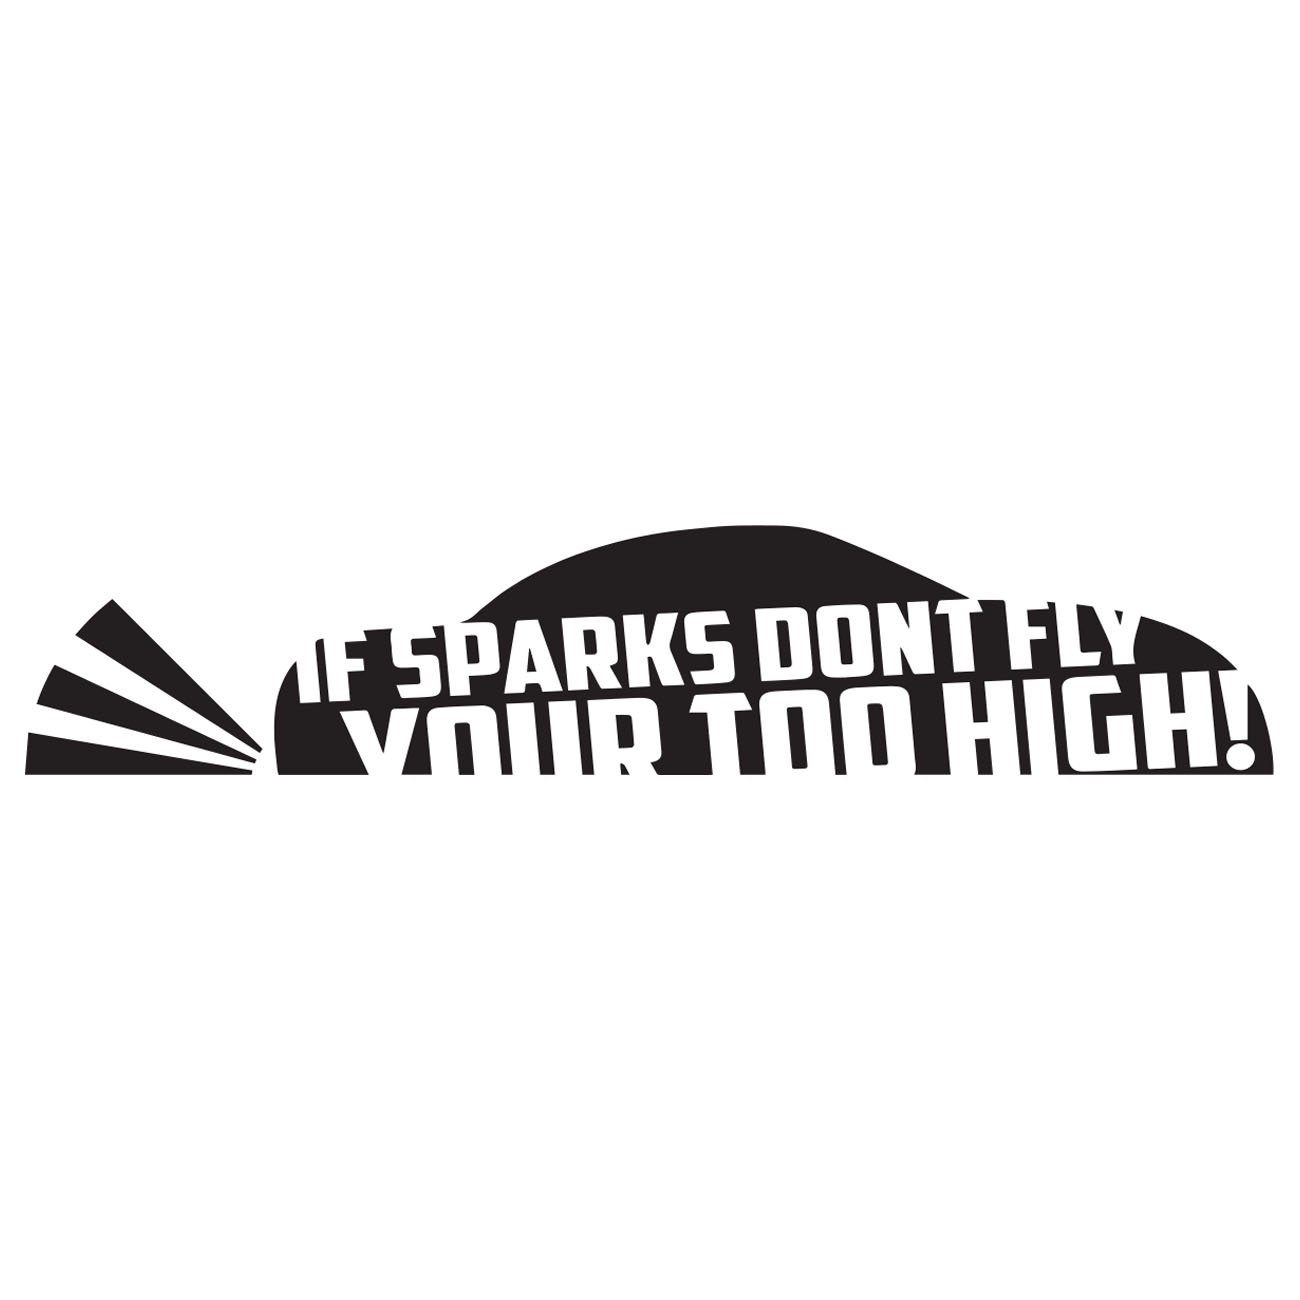 If sparks dont fly - Your too high! 1